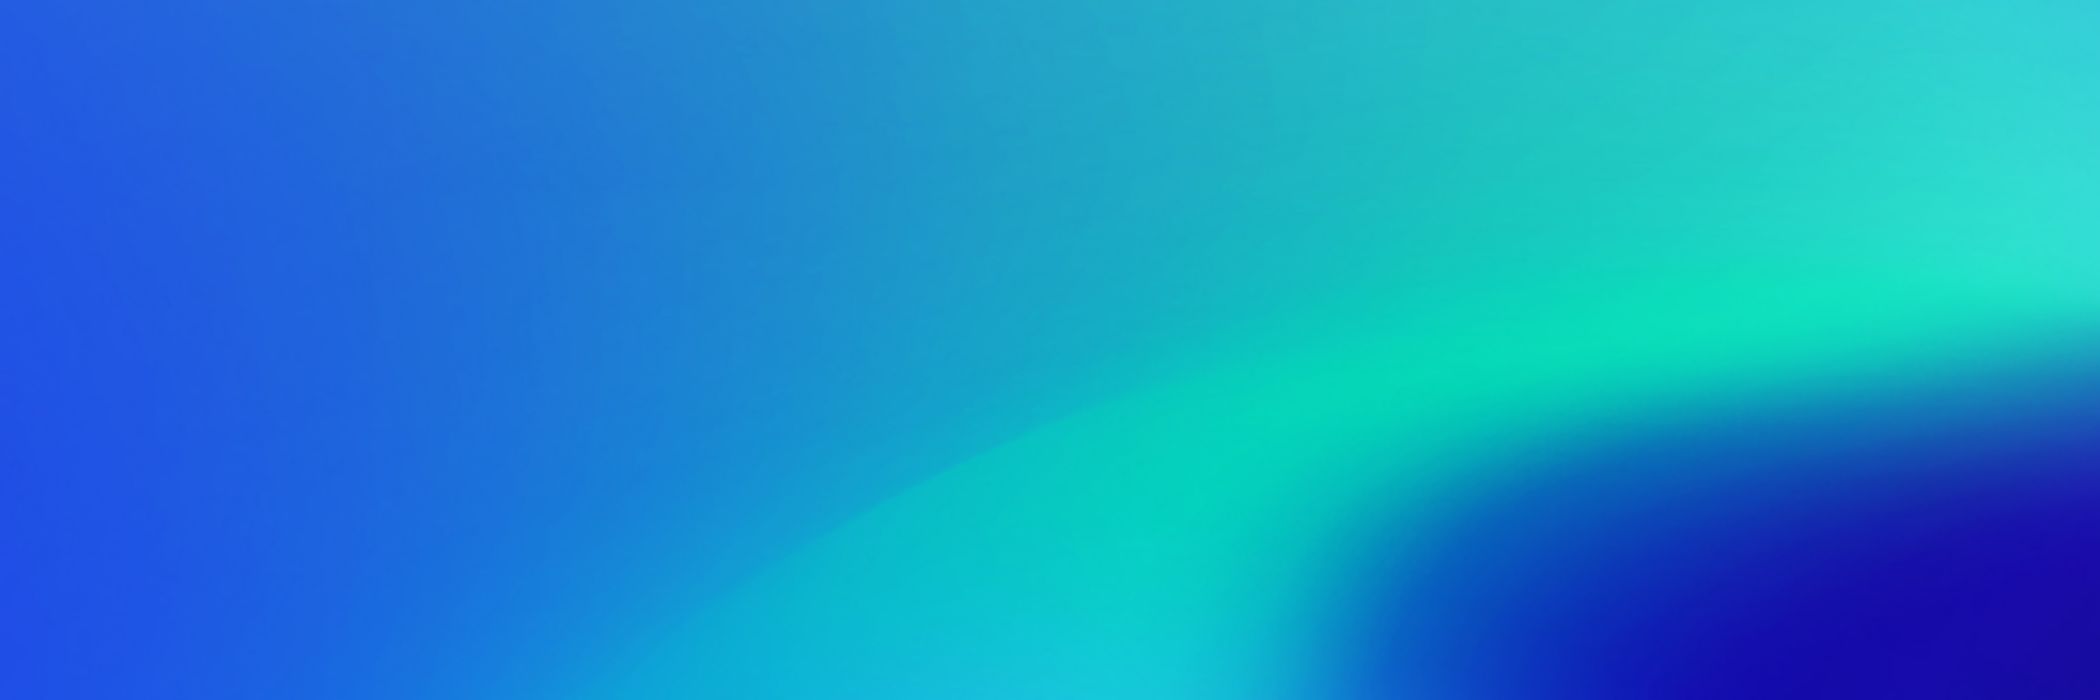 Abstract teal green blue gradient